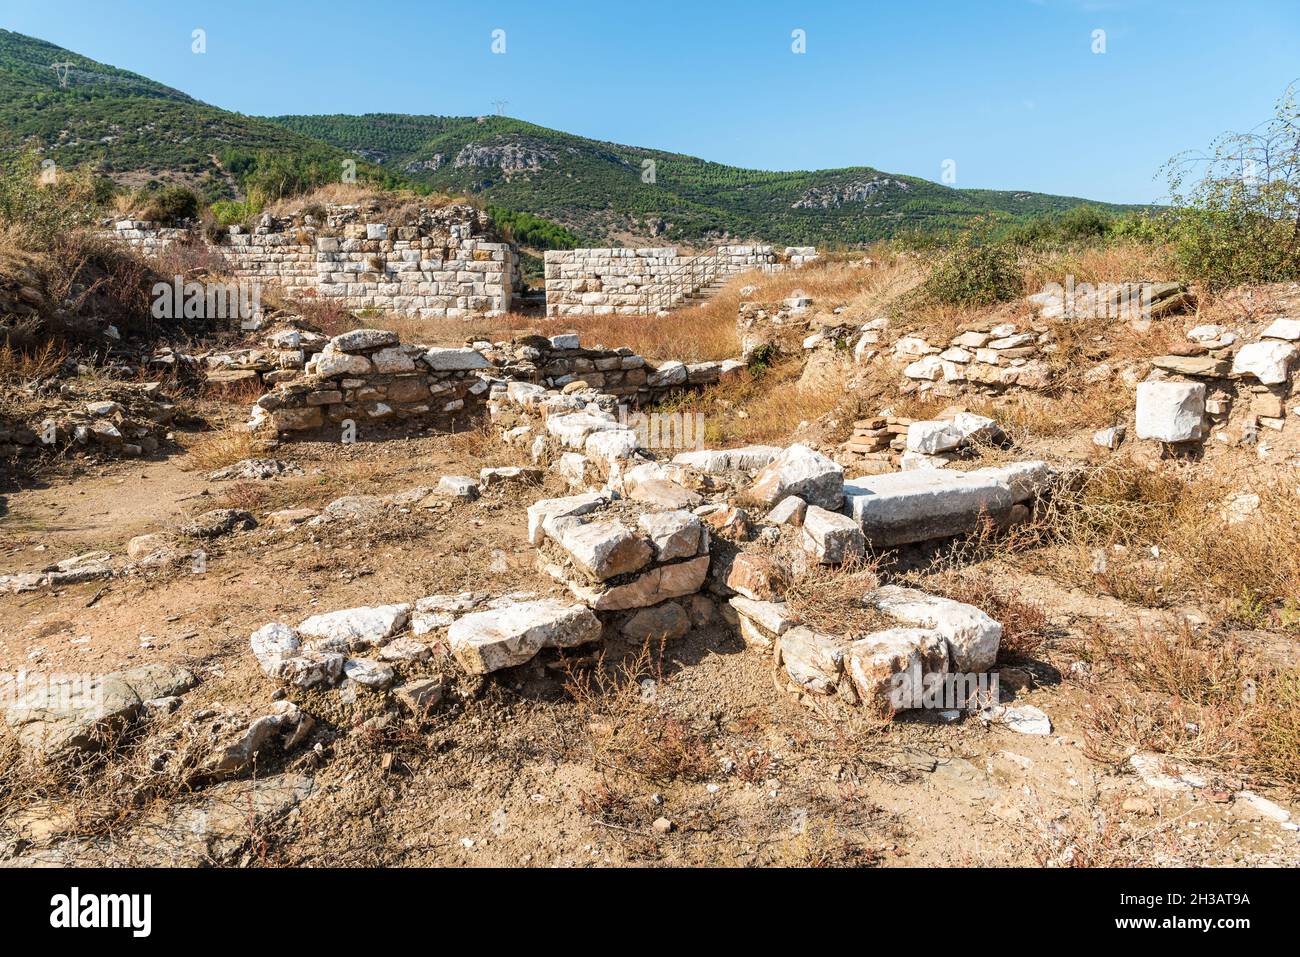 Ruins of the acropolis of Metropolis ancient site in Izmir province of Turkey. The fortification walls were built during the Hellenistic period. Metro Stock Photo